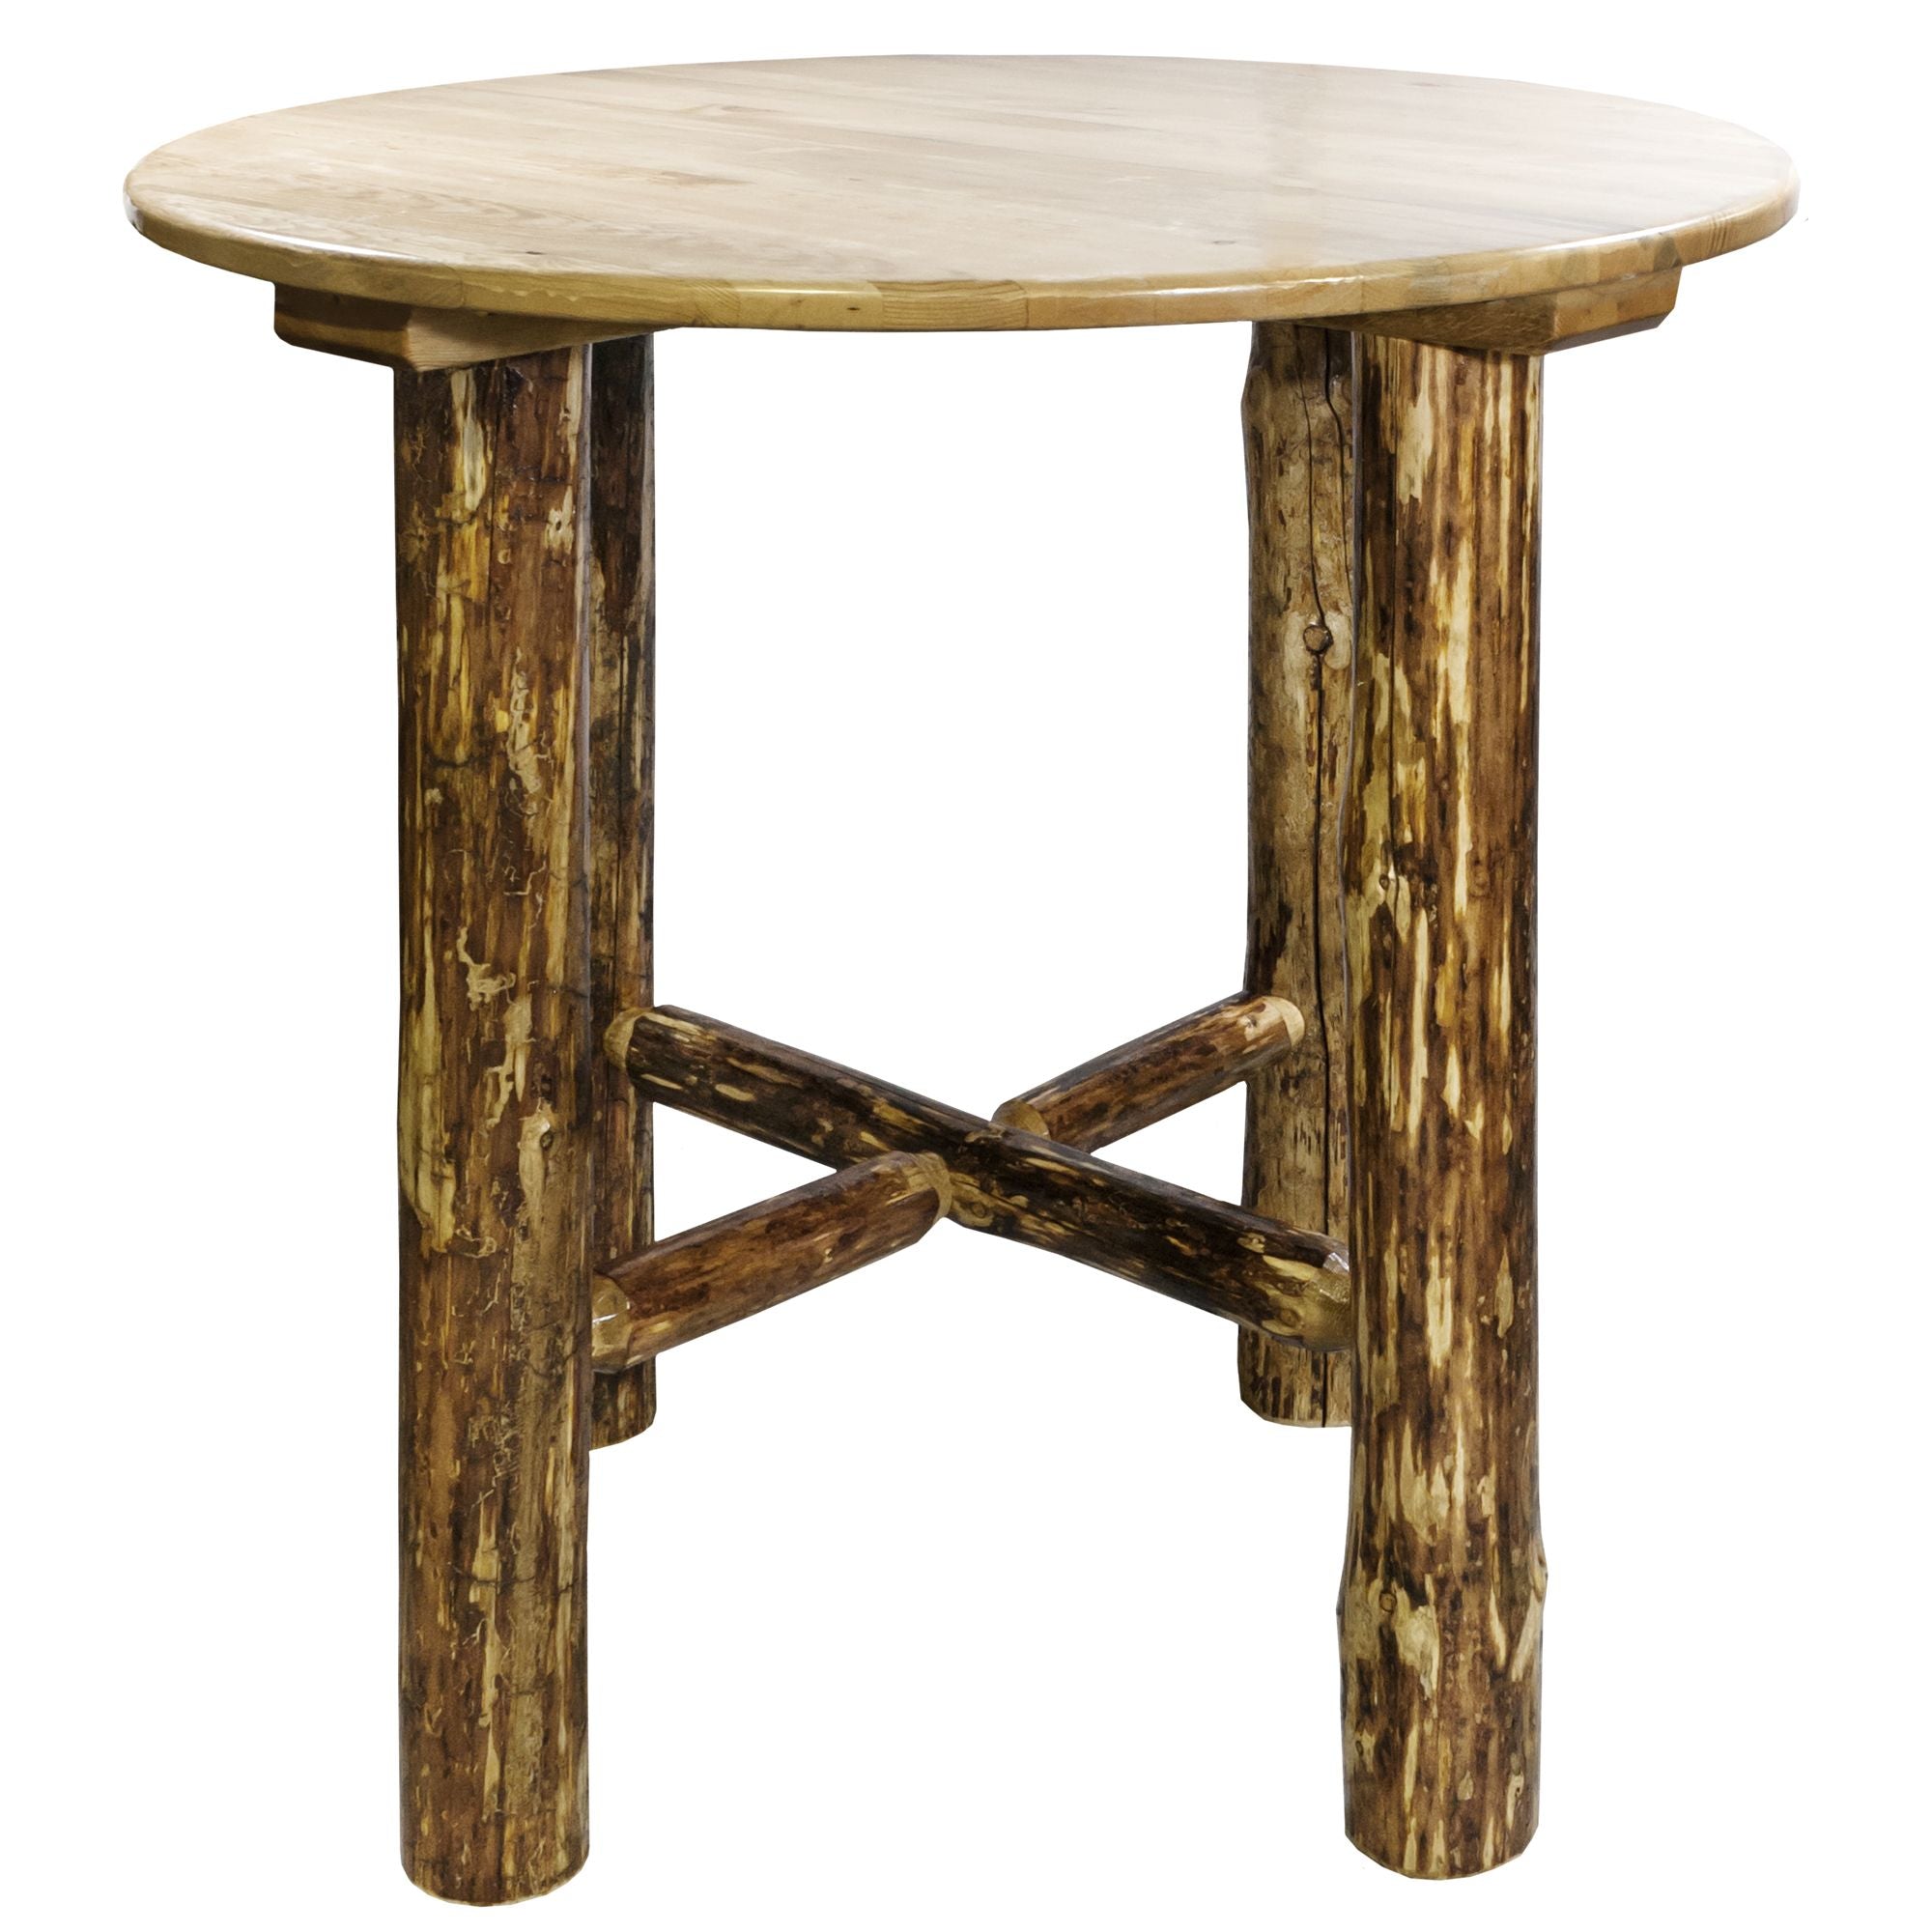 The Montana Glacier Country Collection MWGCBT Bistro Table Staine Lacquered